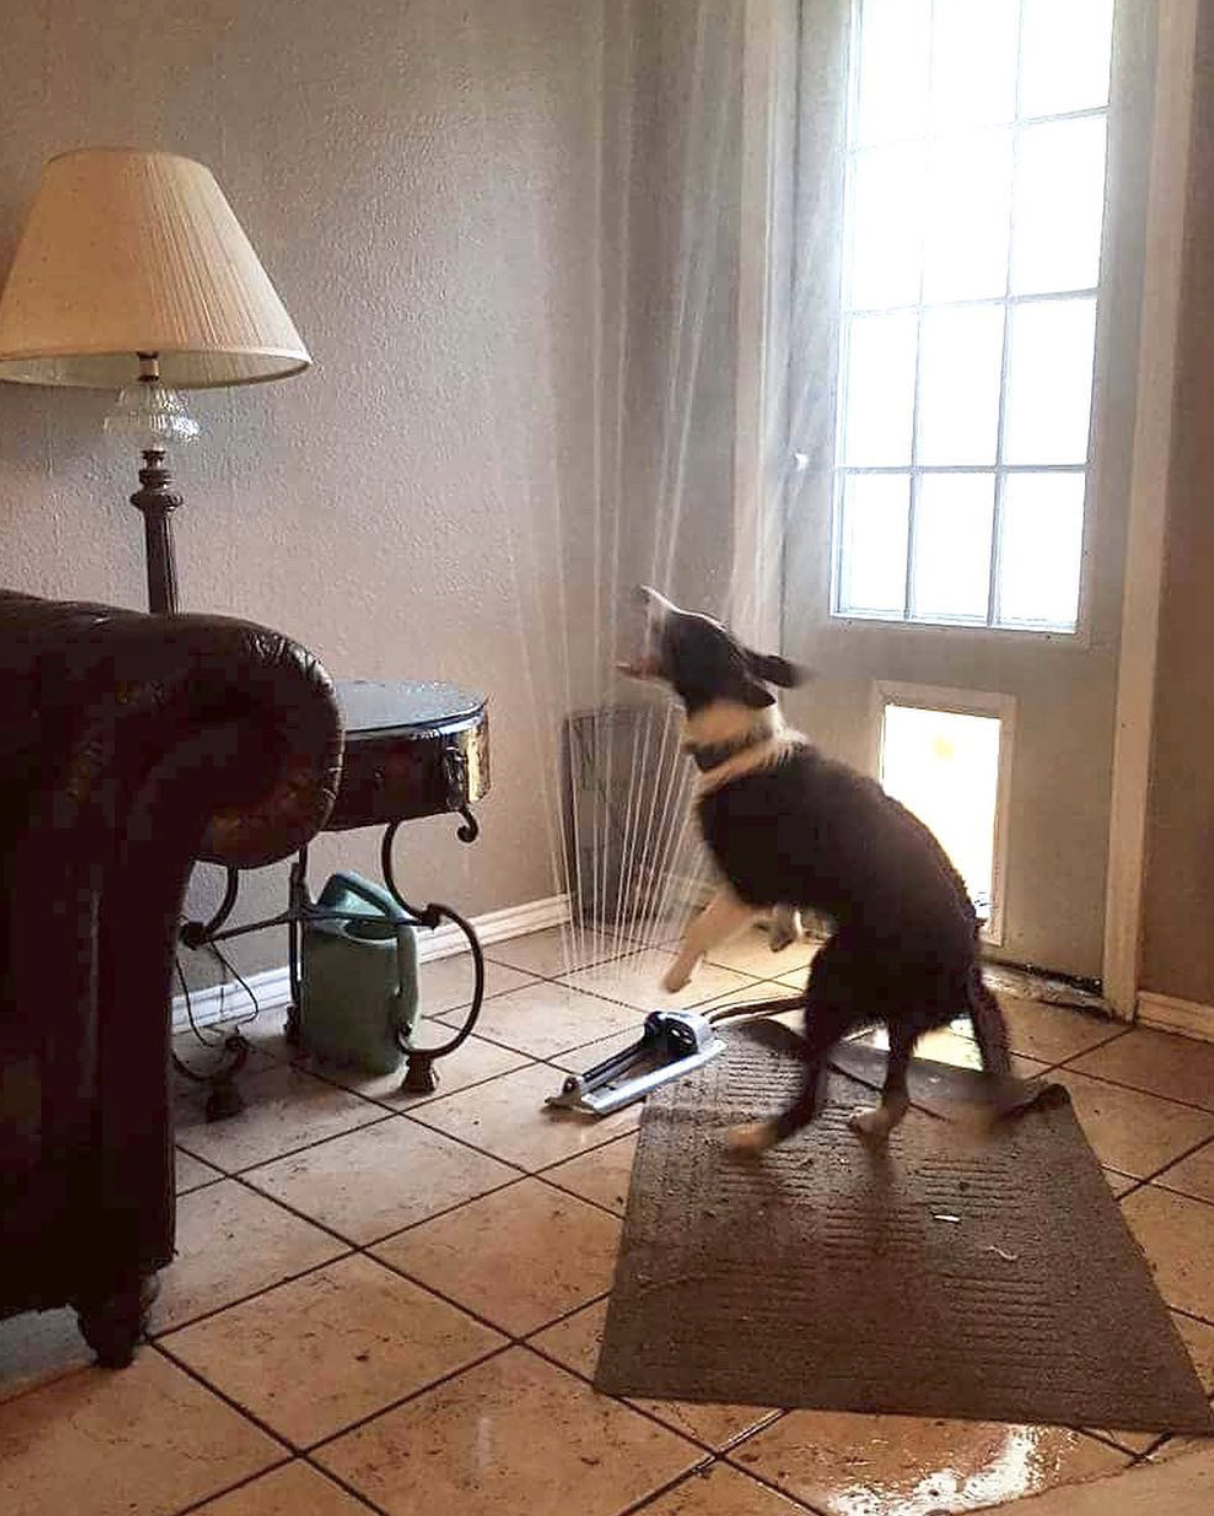 dog dragged the sprinkler into the house while it is running